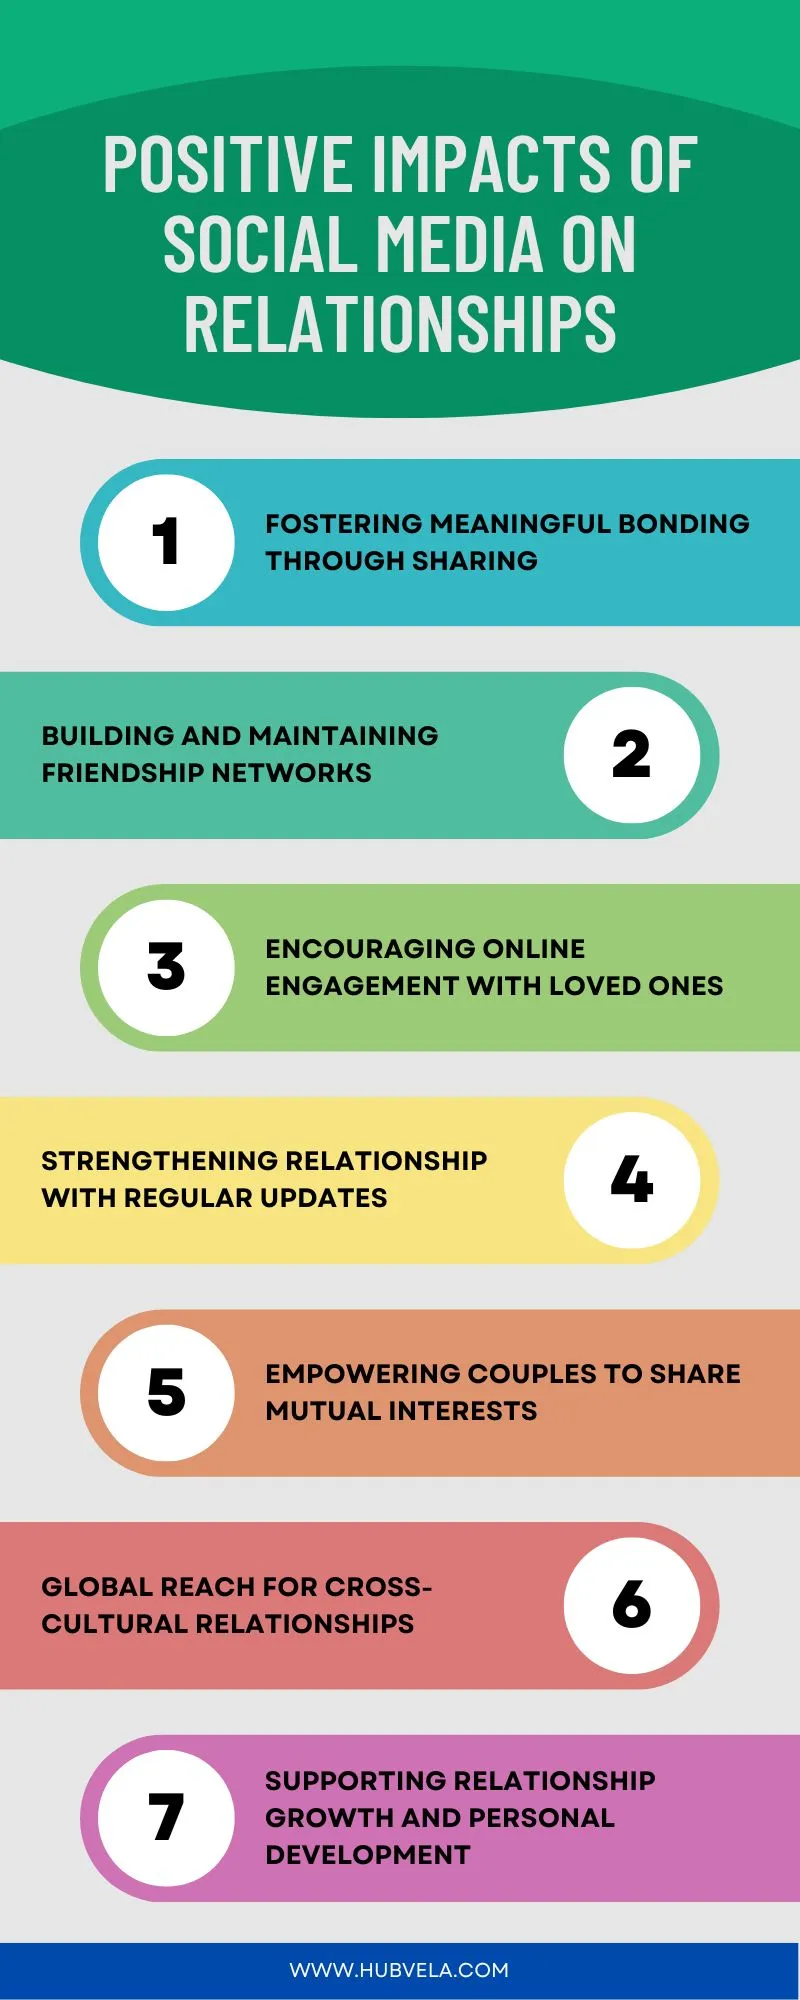 Positive Impacts of Social Media on Relationships Infographic